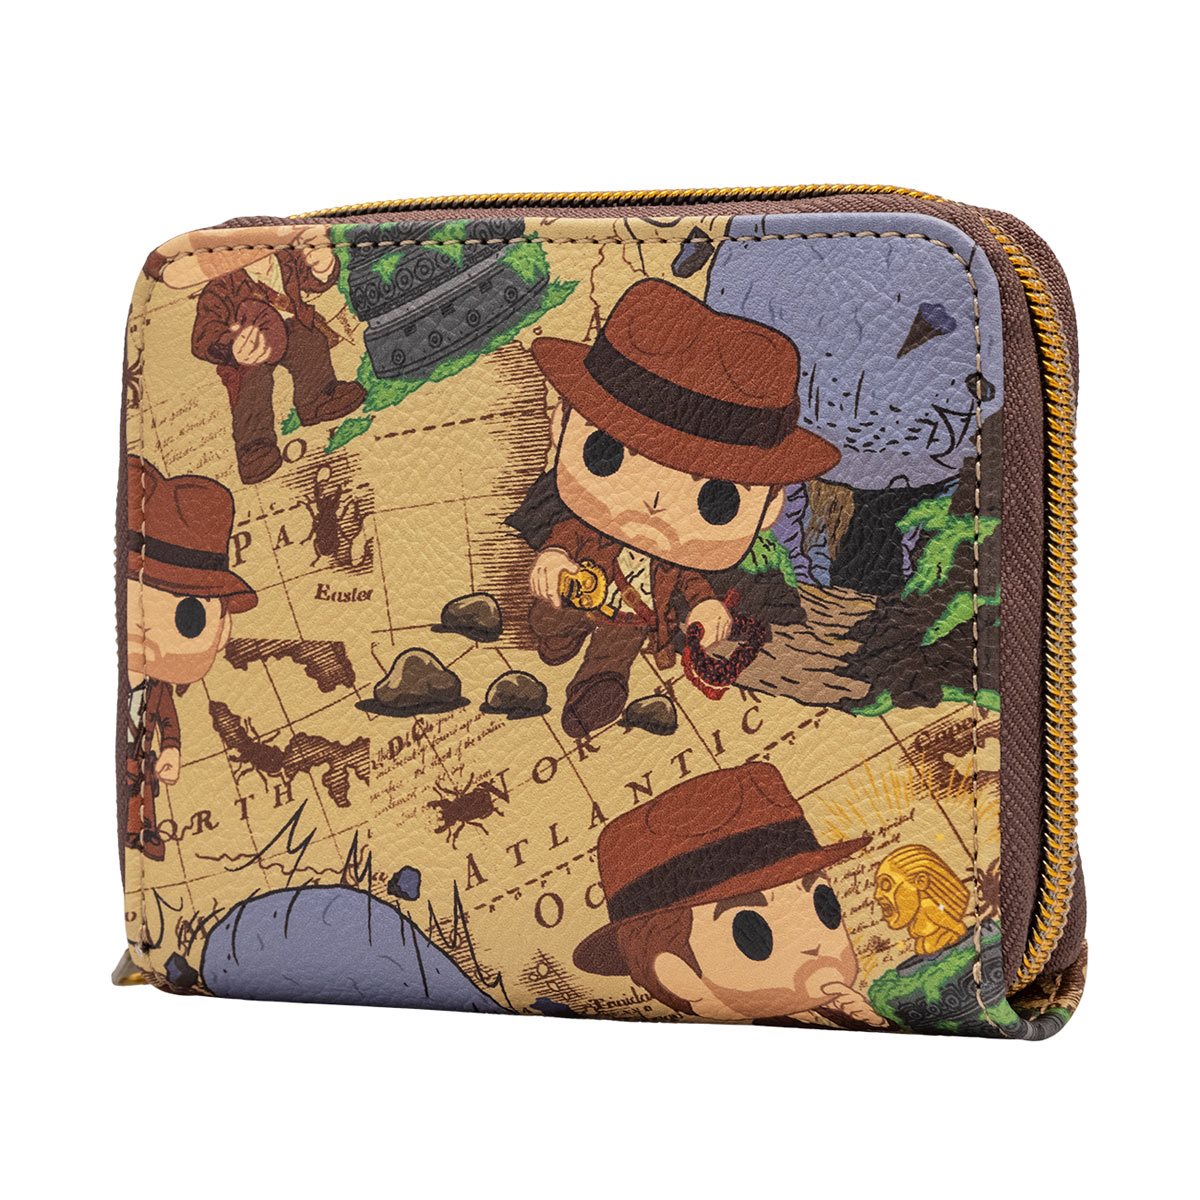 Buy Indiana Jones Raiders of the Lost Ark Mini Backpack with Coin Purse at  Loungefly.